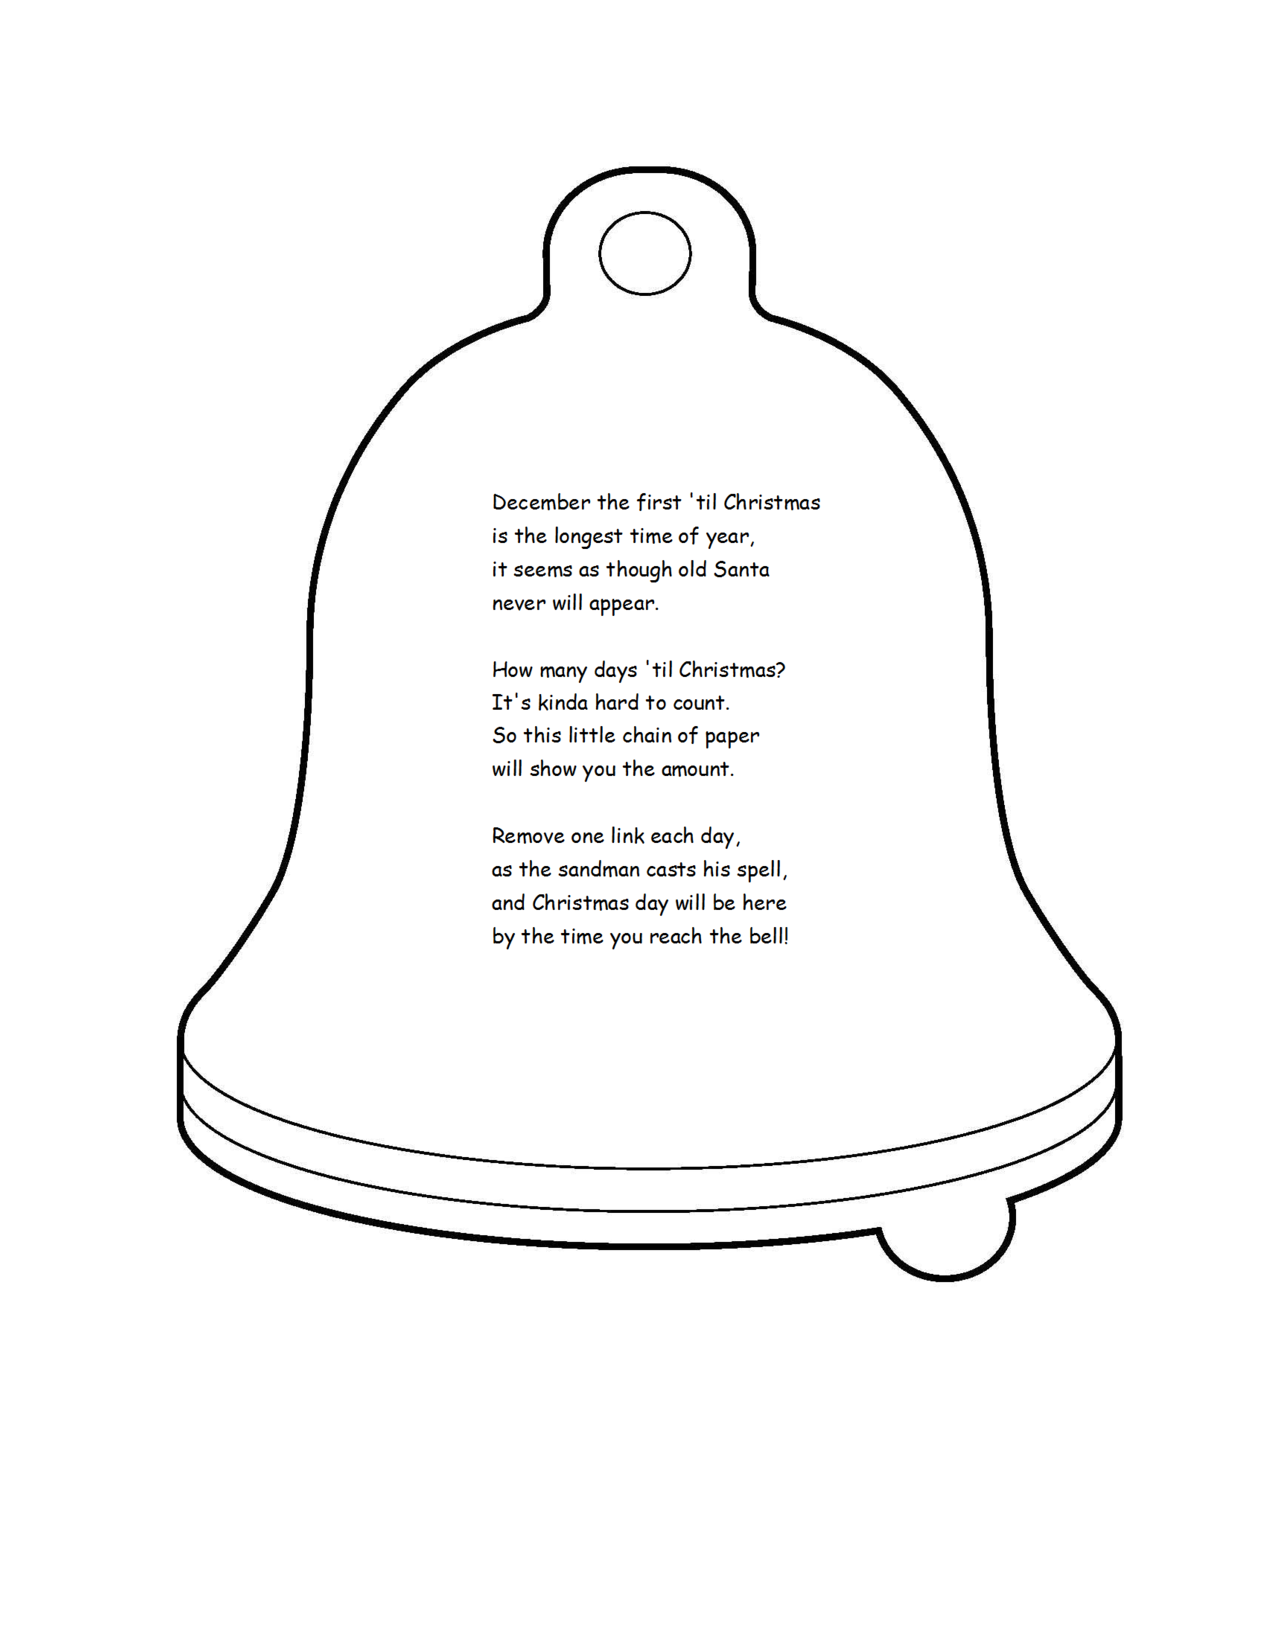 Christmas Bell Chain Poem